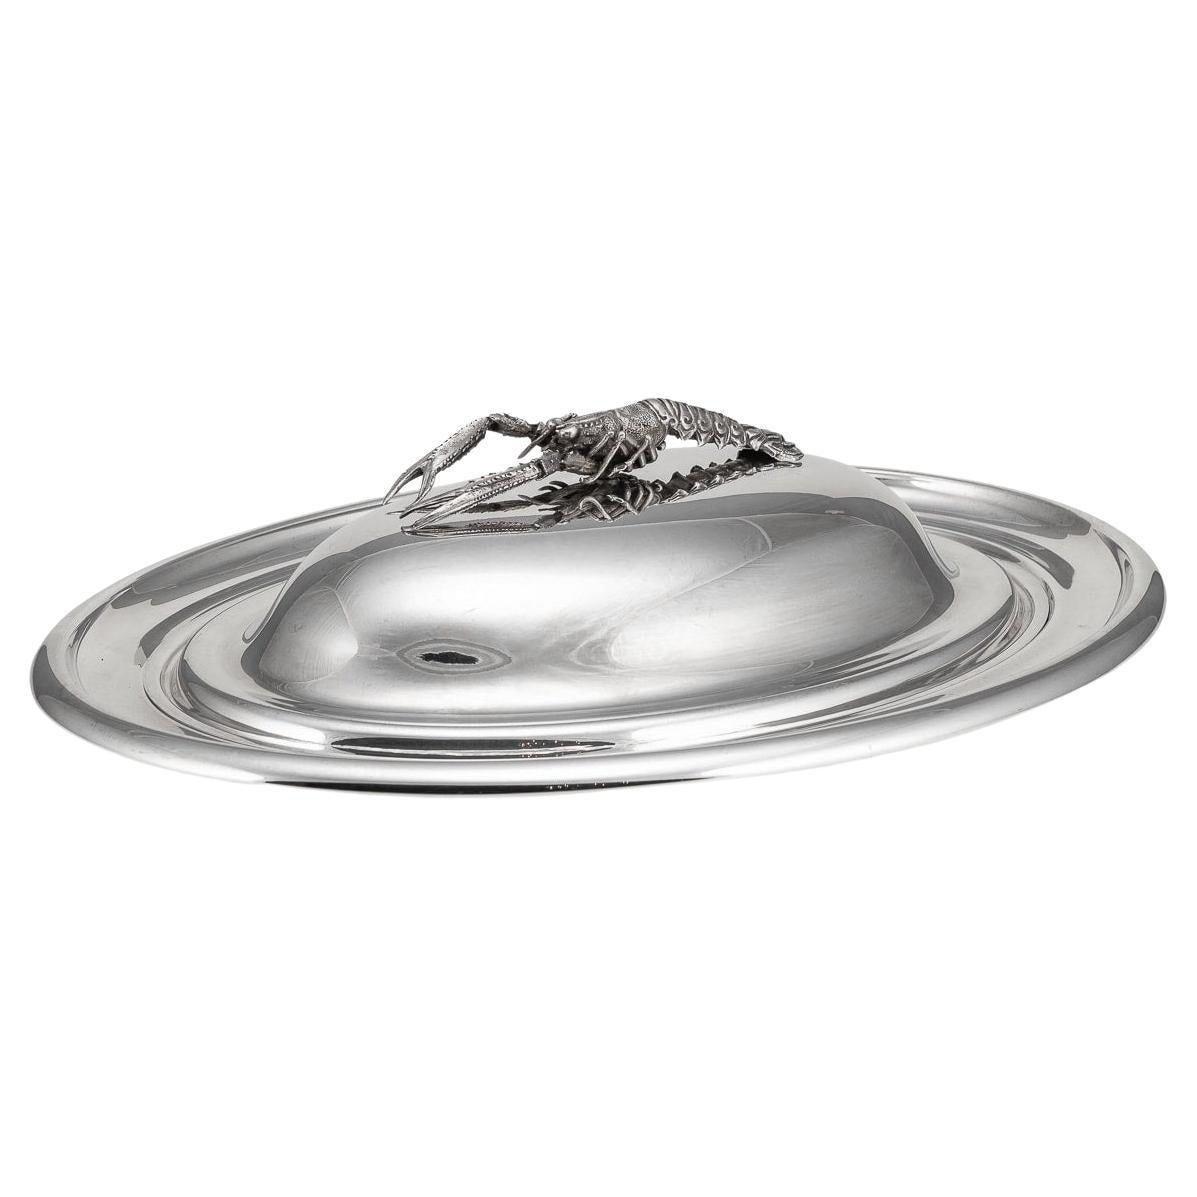 20th Century Italian Silver Plated Lobster Serving Dish, C.1960